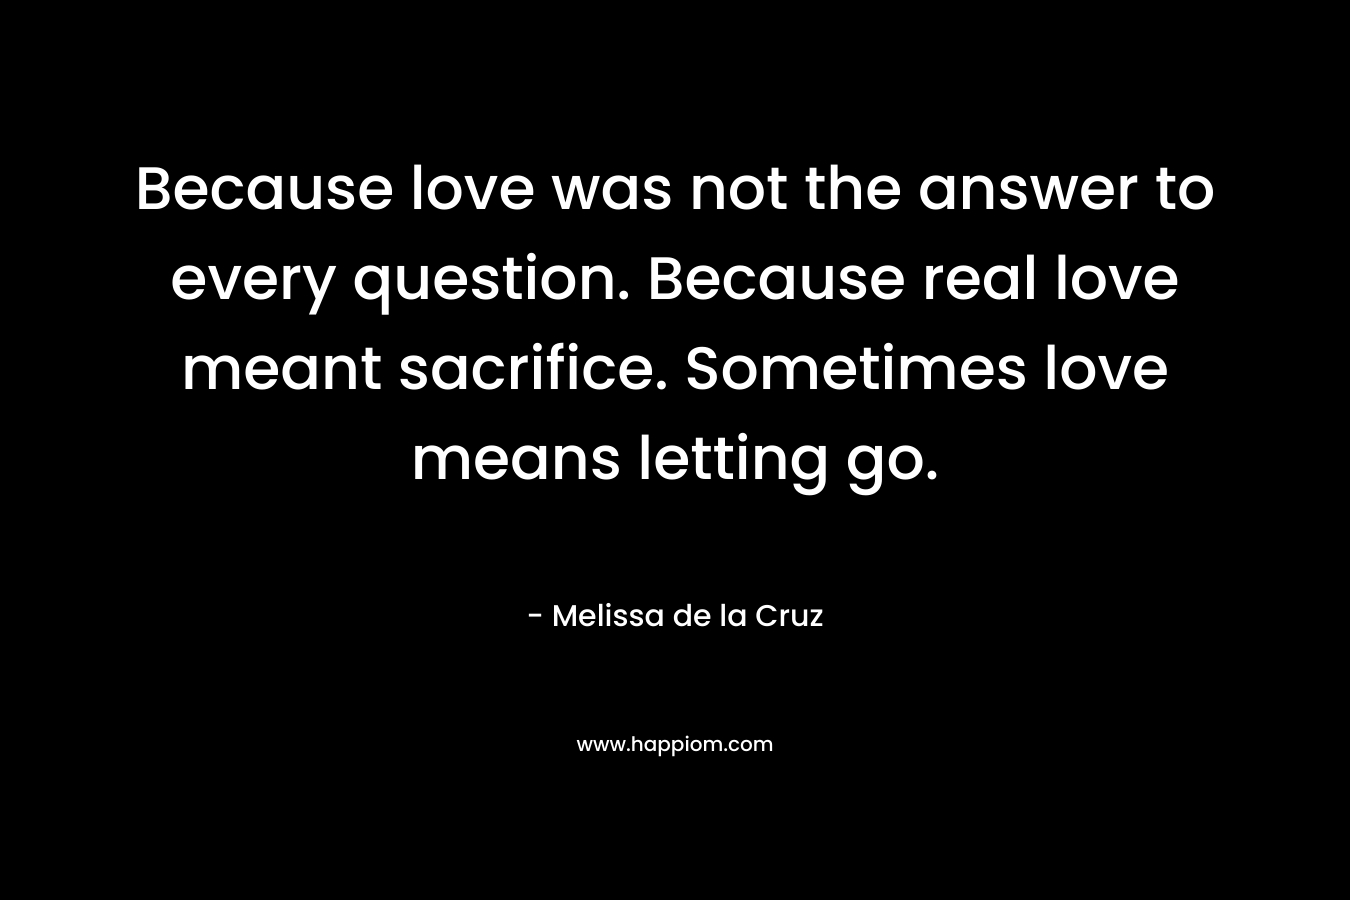 Because love was not the answer to every question. Because real love meant sacrifice. Sometimes love means letting go. – Melissa de la Cruz